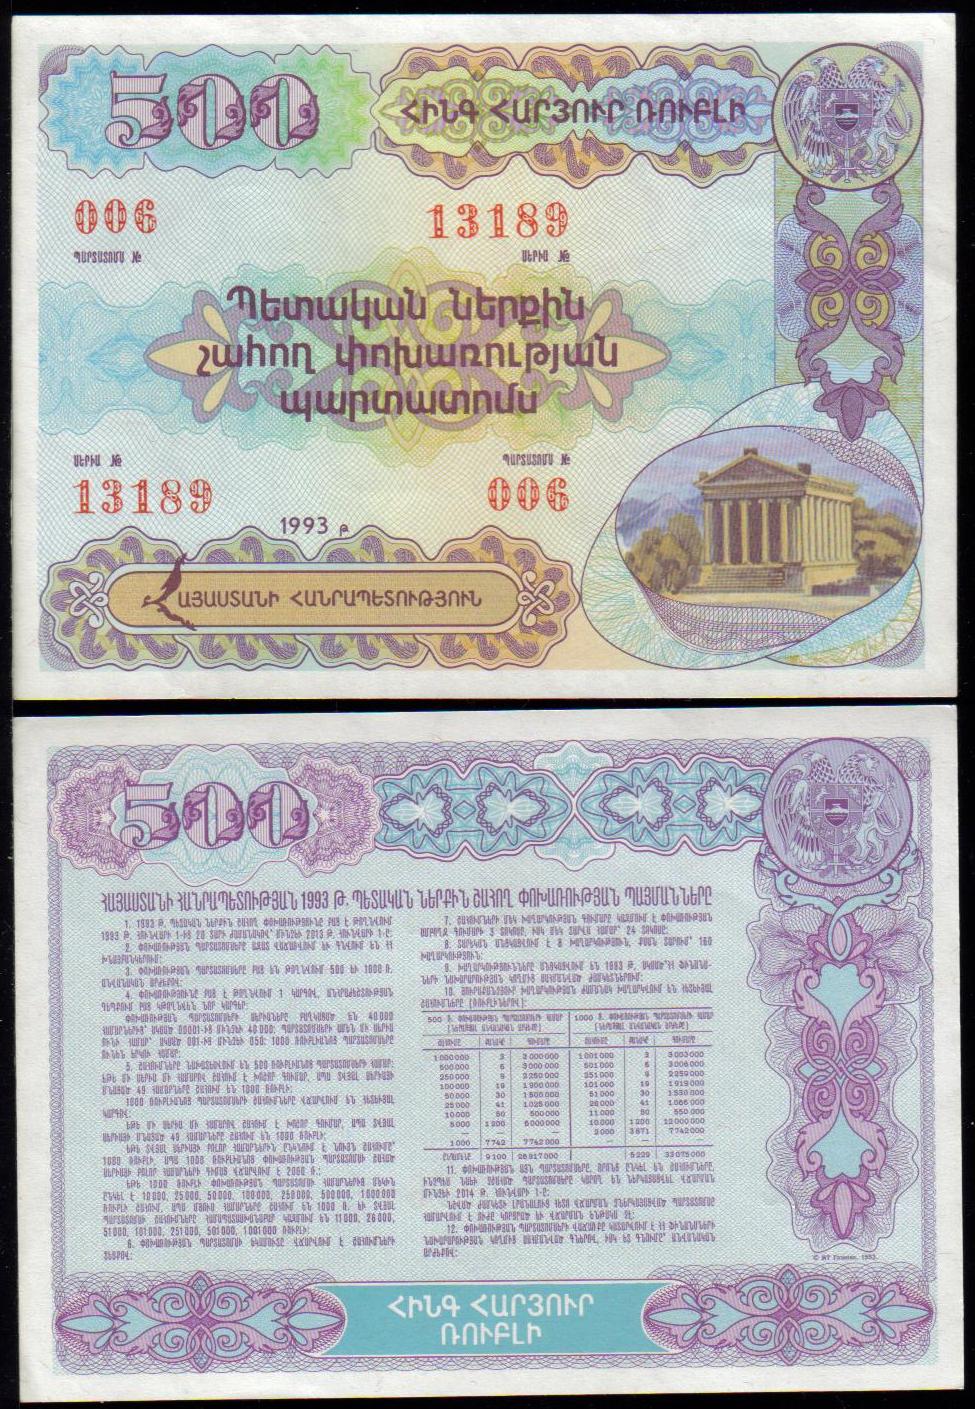 <font 001><font color=red><b>Armenia Pick Not listed, Government Bonds, 500 Rubles, AU-UNC</font></b>  <p> In 1993, after breaking links from the Russian Rubles, and before establishing the Armenian Currency, the Dram, the Armenian Government issued two Bonds, 500 and 1000 Rubles which were in circulation for a short time. <br>  The back has detailed description, both in Armenian and Russian, for the dividends to be paid on yearly basis.  <p> See the image.  You will get this exact note with Serial #006/13189.